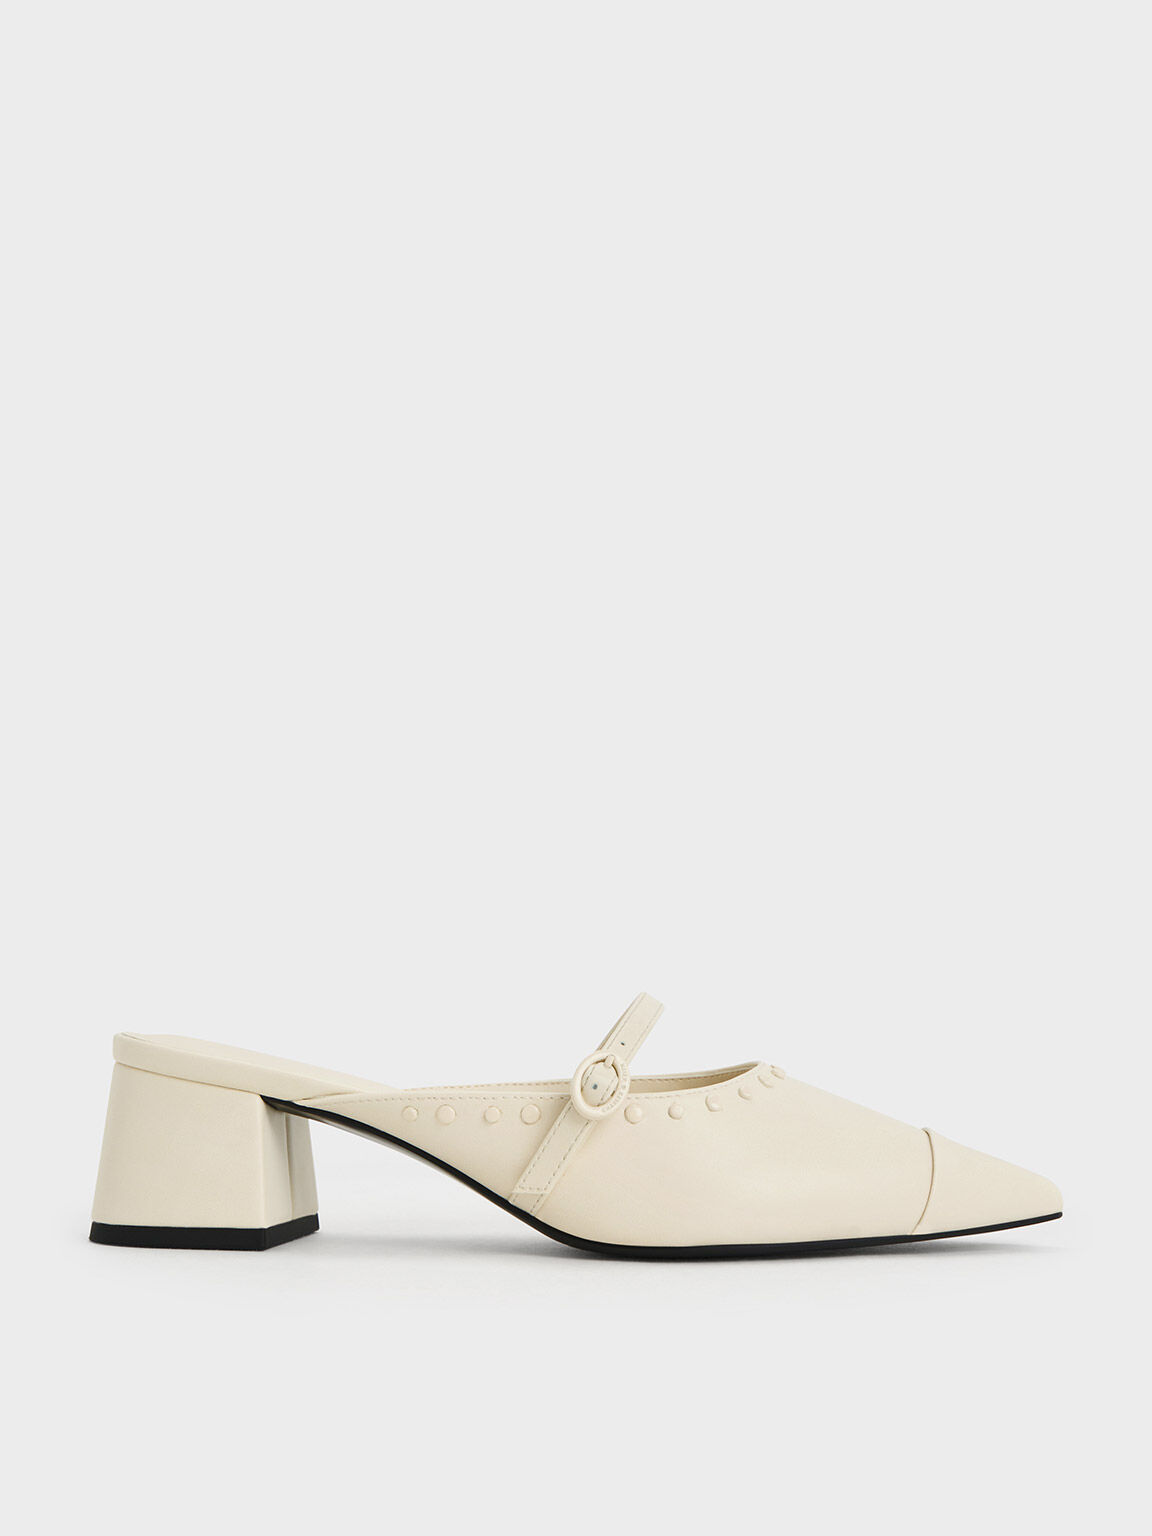 Charles & Keith Women's Sepphe Cut-Out Strap Heeled Mule